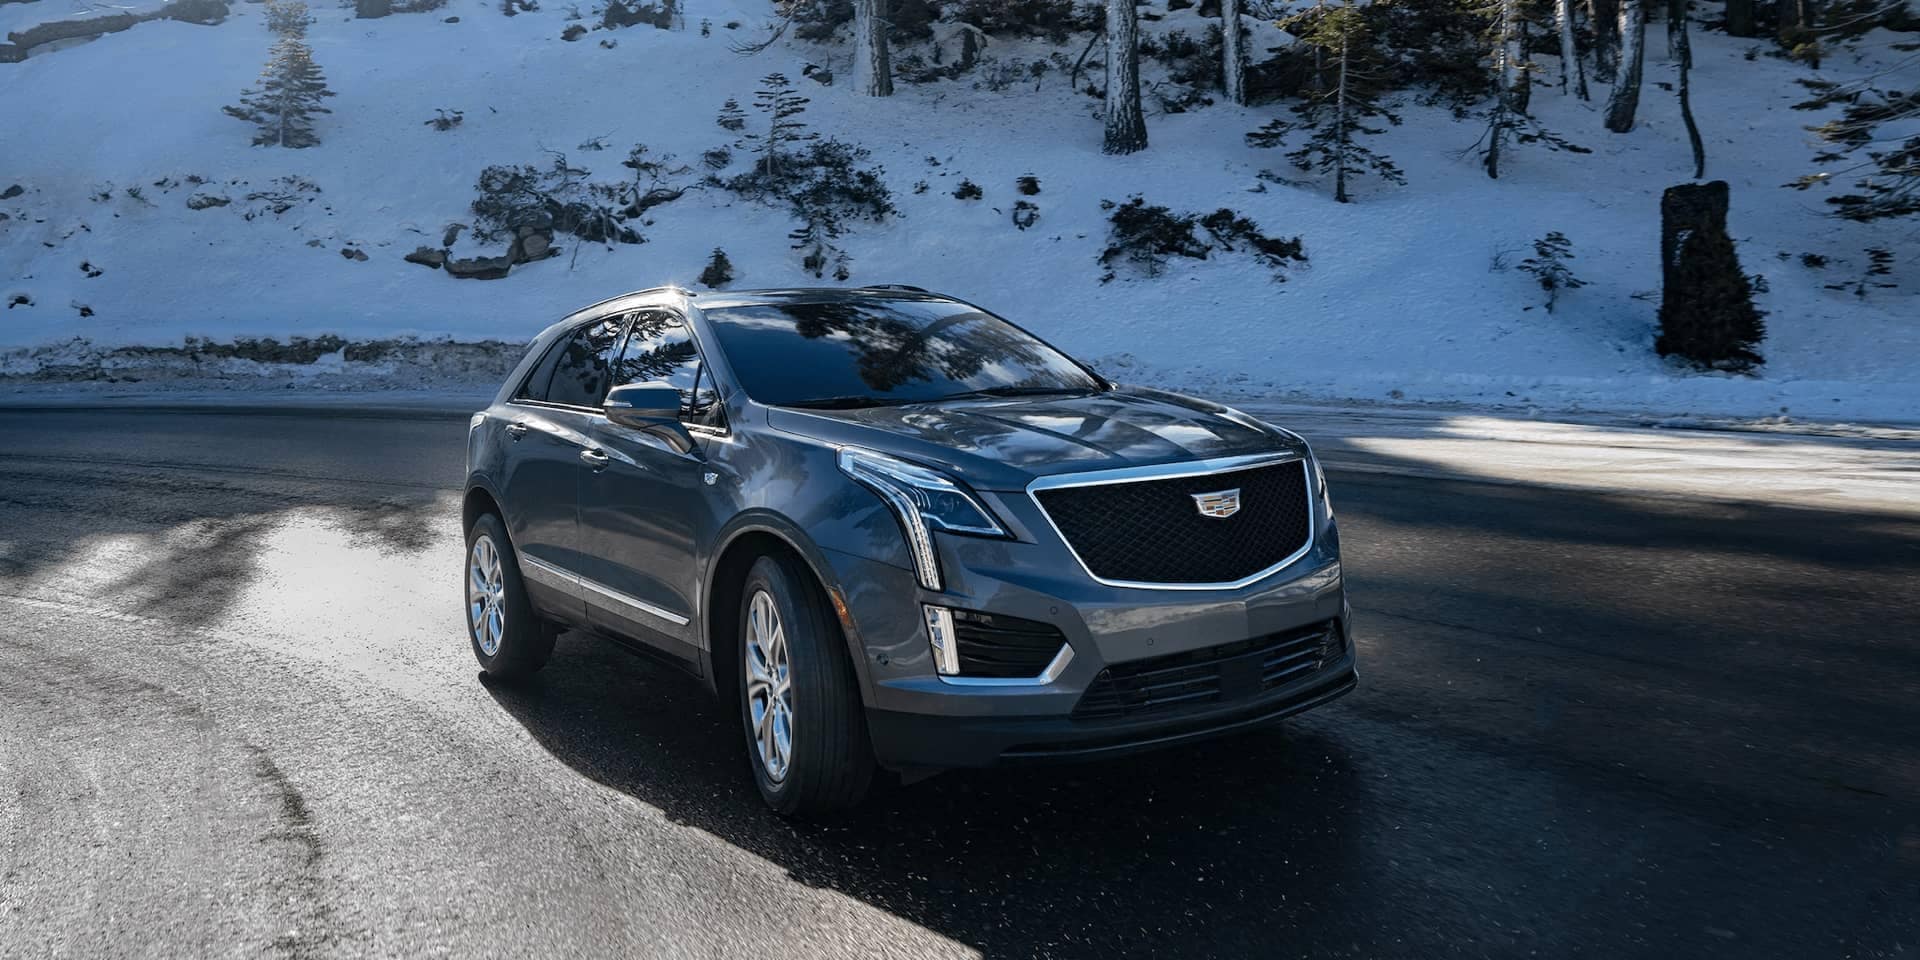 Cadillac on the road in the mountains